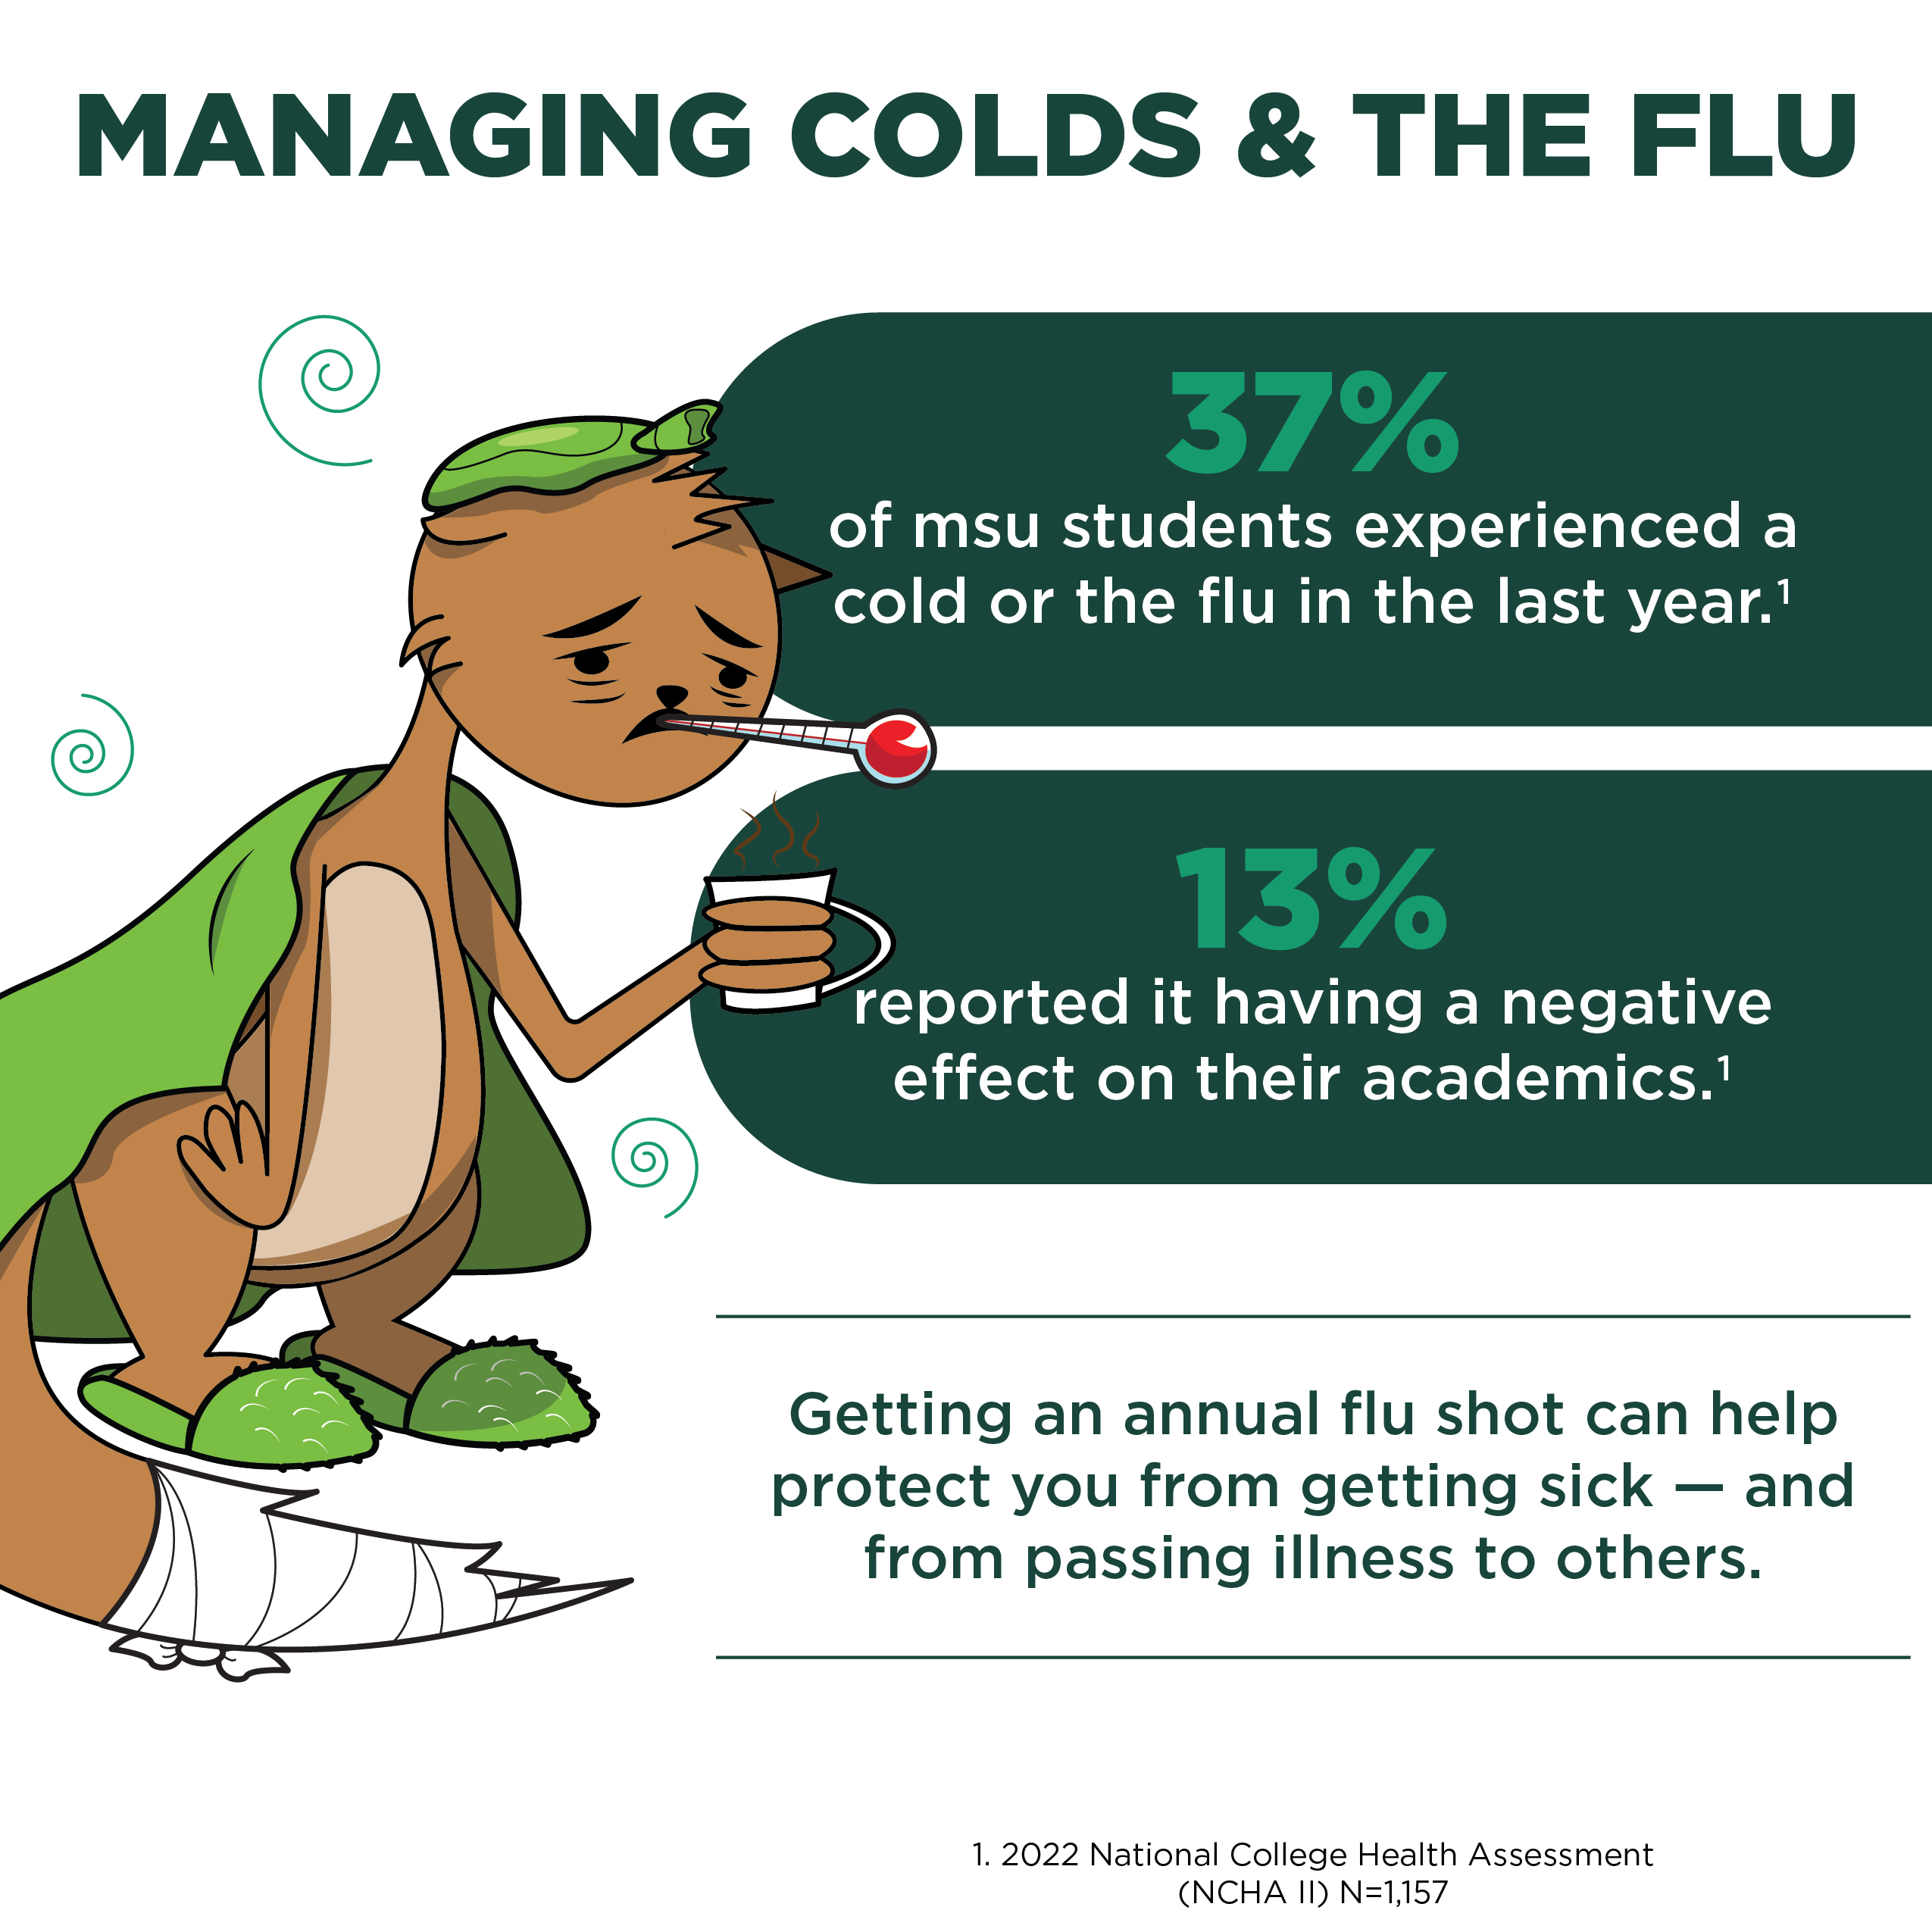 An illustration of a squirrel who looks sick, holding a cup of hot liquid. Text reads (MANAGING COLDS & THE FLU , 37% of msu students experienced a cold or the flu in the last year.1"